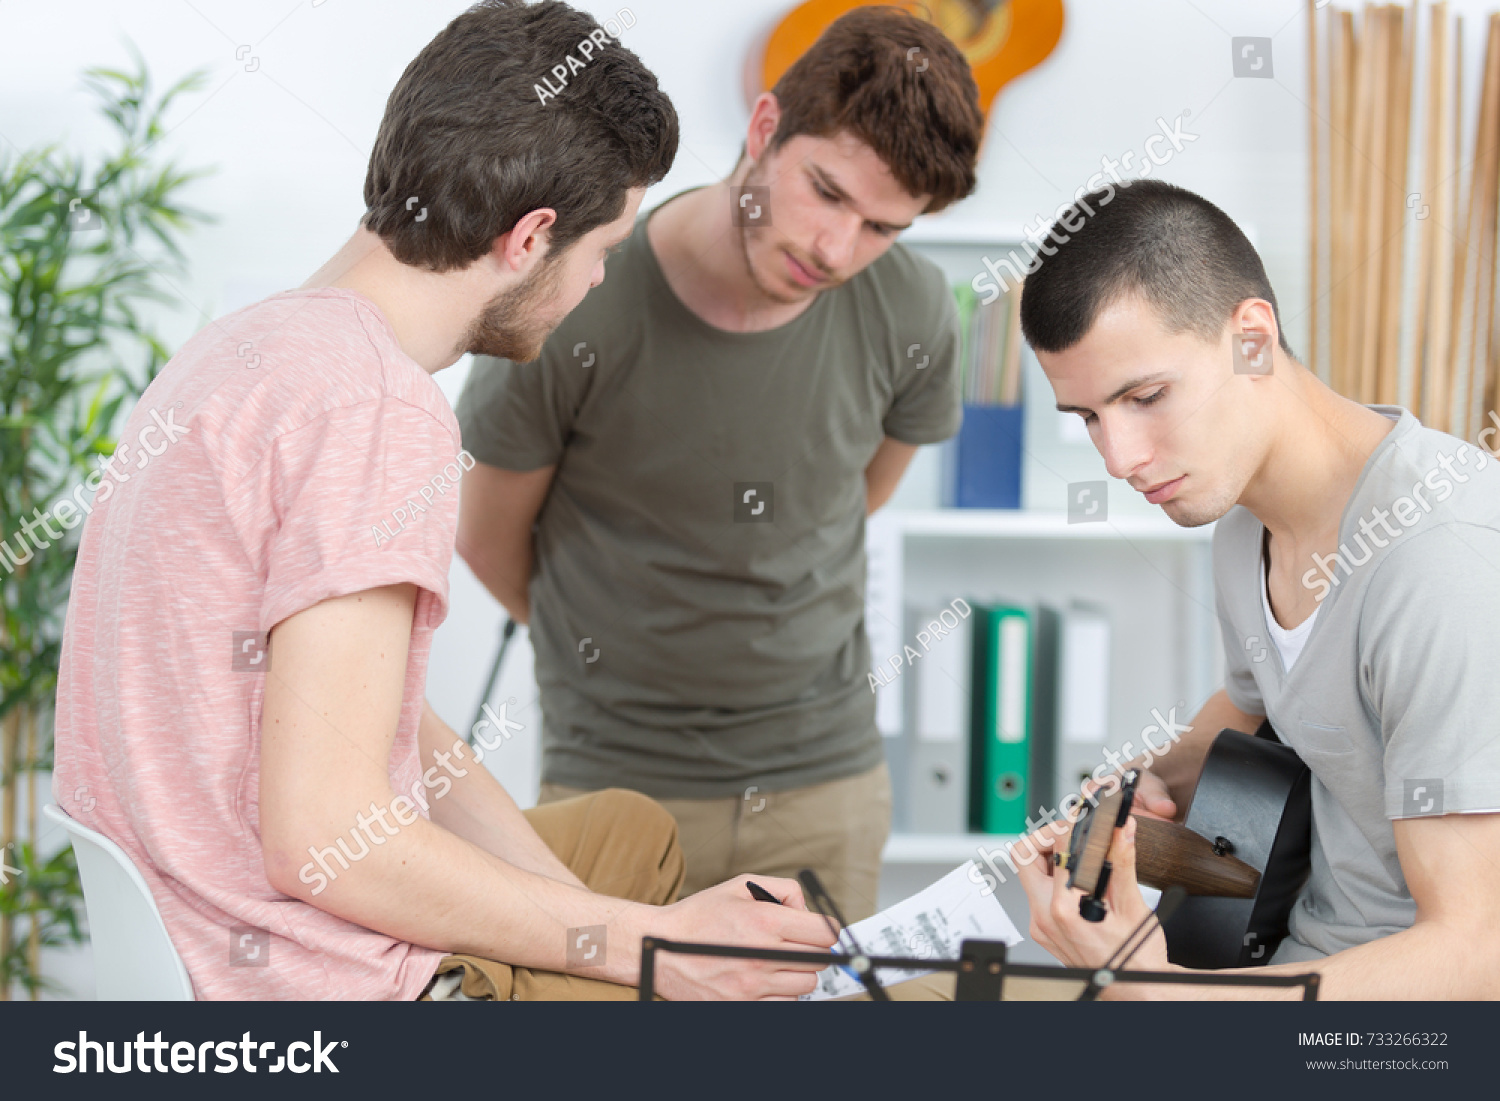 musicians with guitar at music store #733266322